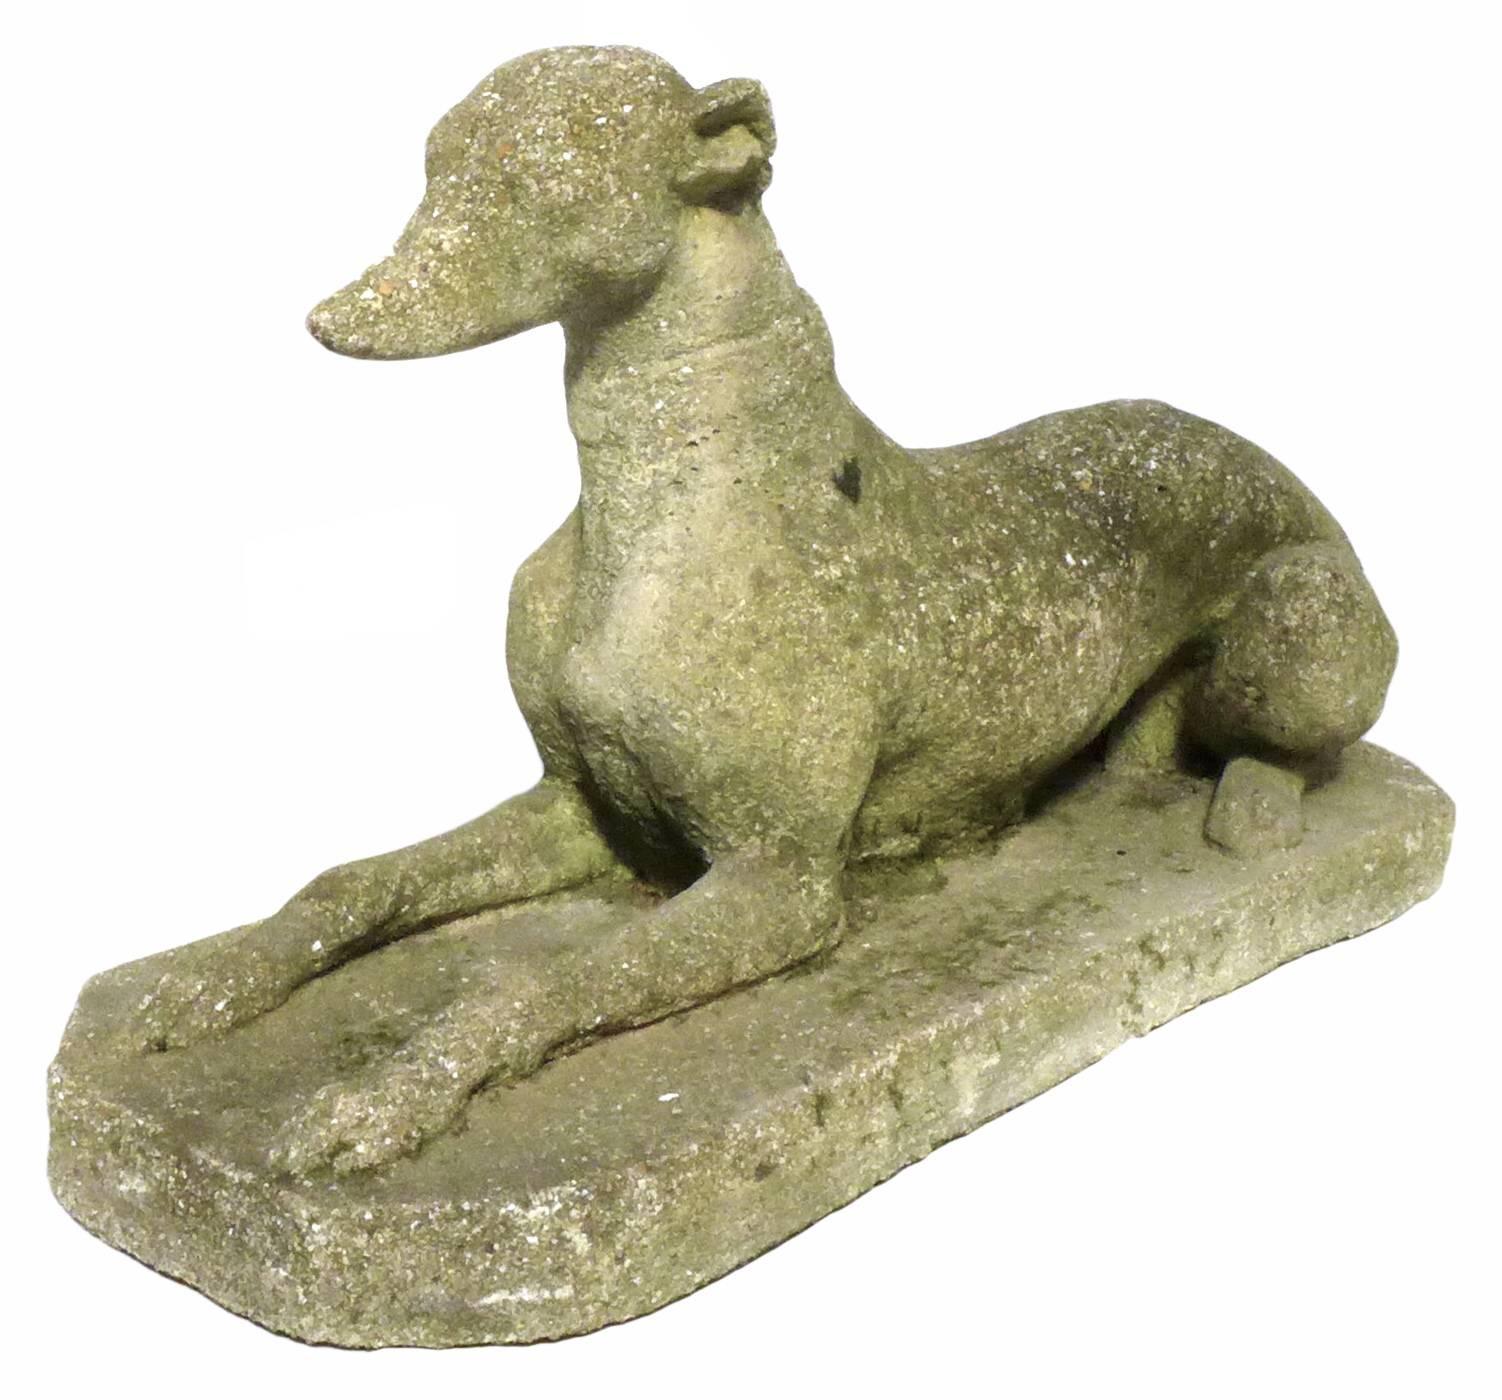 A perfect pair of cast concrete greyhound or whippet statues. Wonderfully worn and colored from years of life outdoors, a Classic garden or entryway figural motif great for use indoors or out.